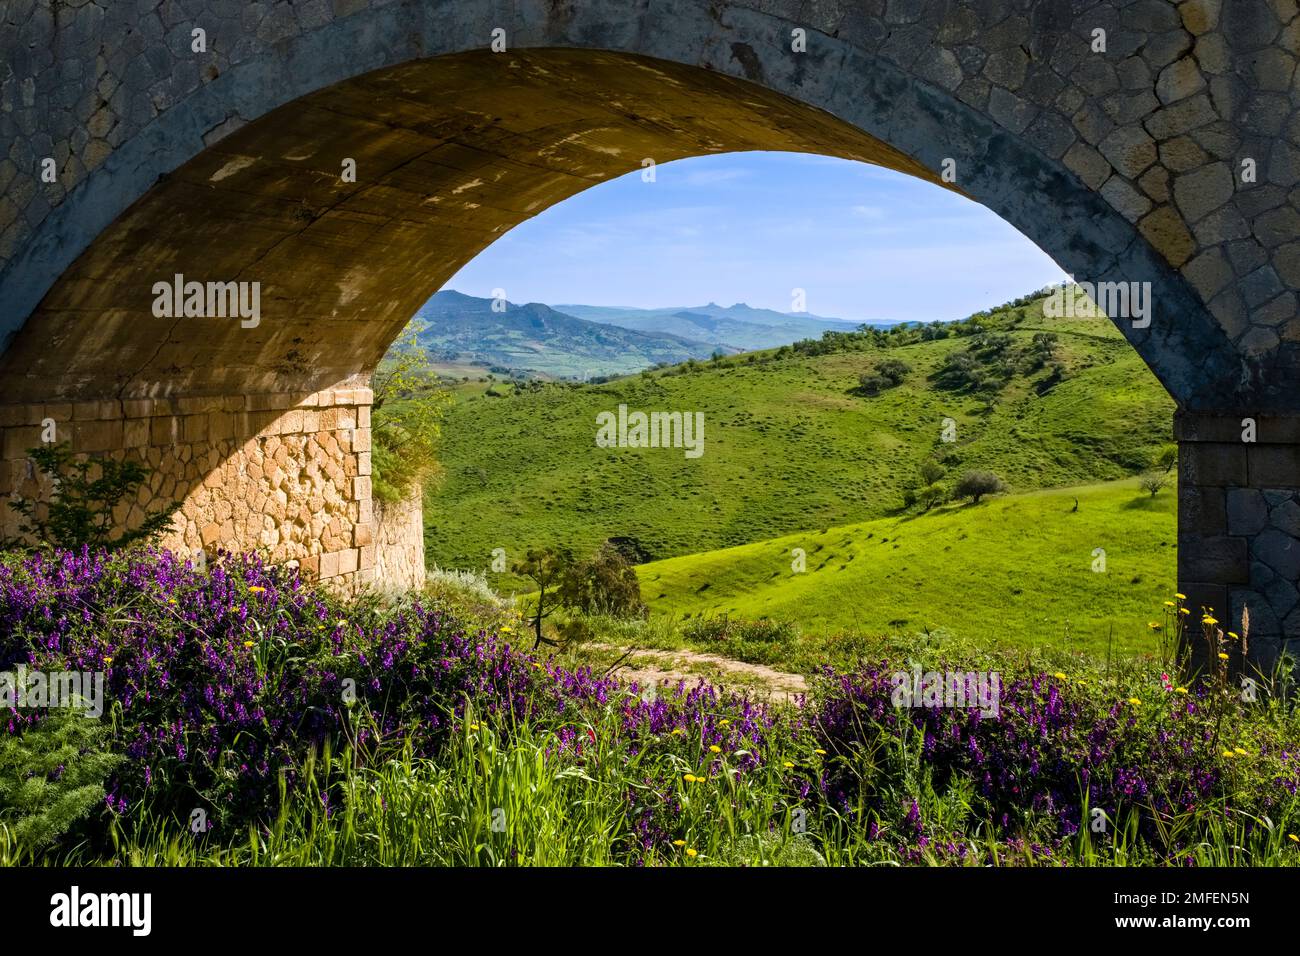 Agricultural landscape with green hills, trees and fields in Central Sicily, seen through the arch of a bridge. Stock Photo